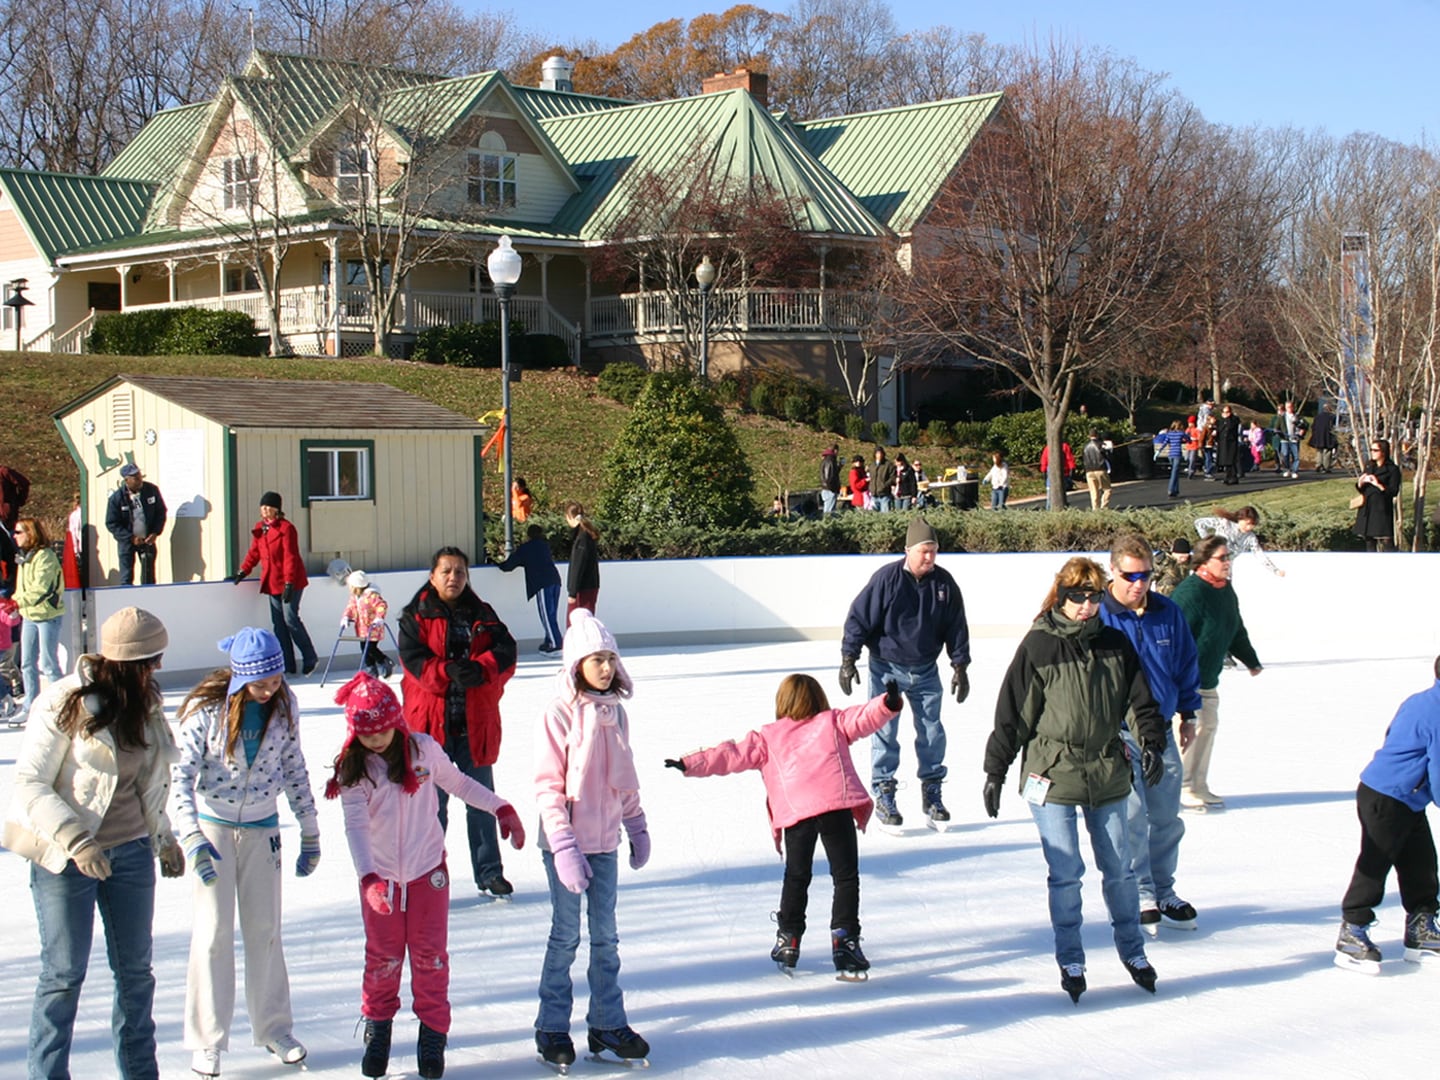 The rink at Quiet Waters Park is the only public ice skating spot in Annapolis.